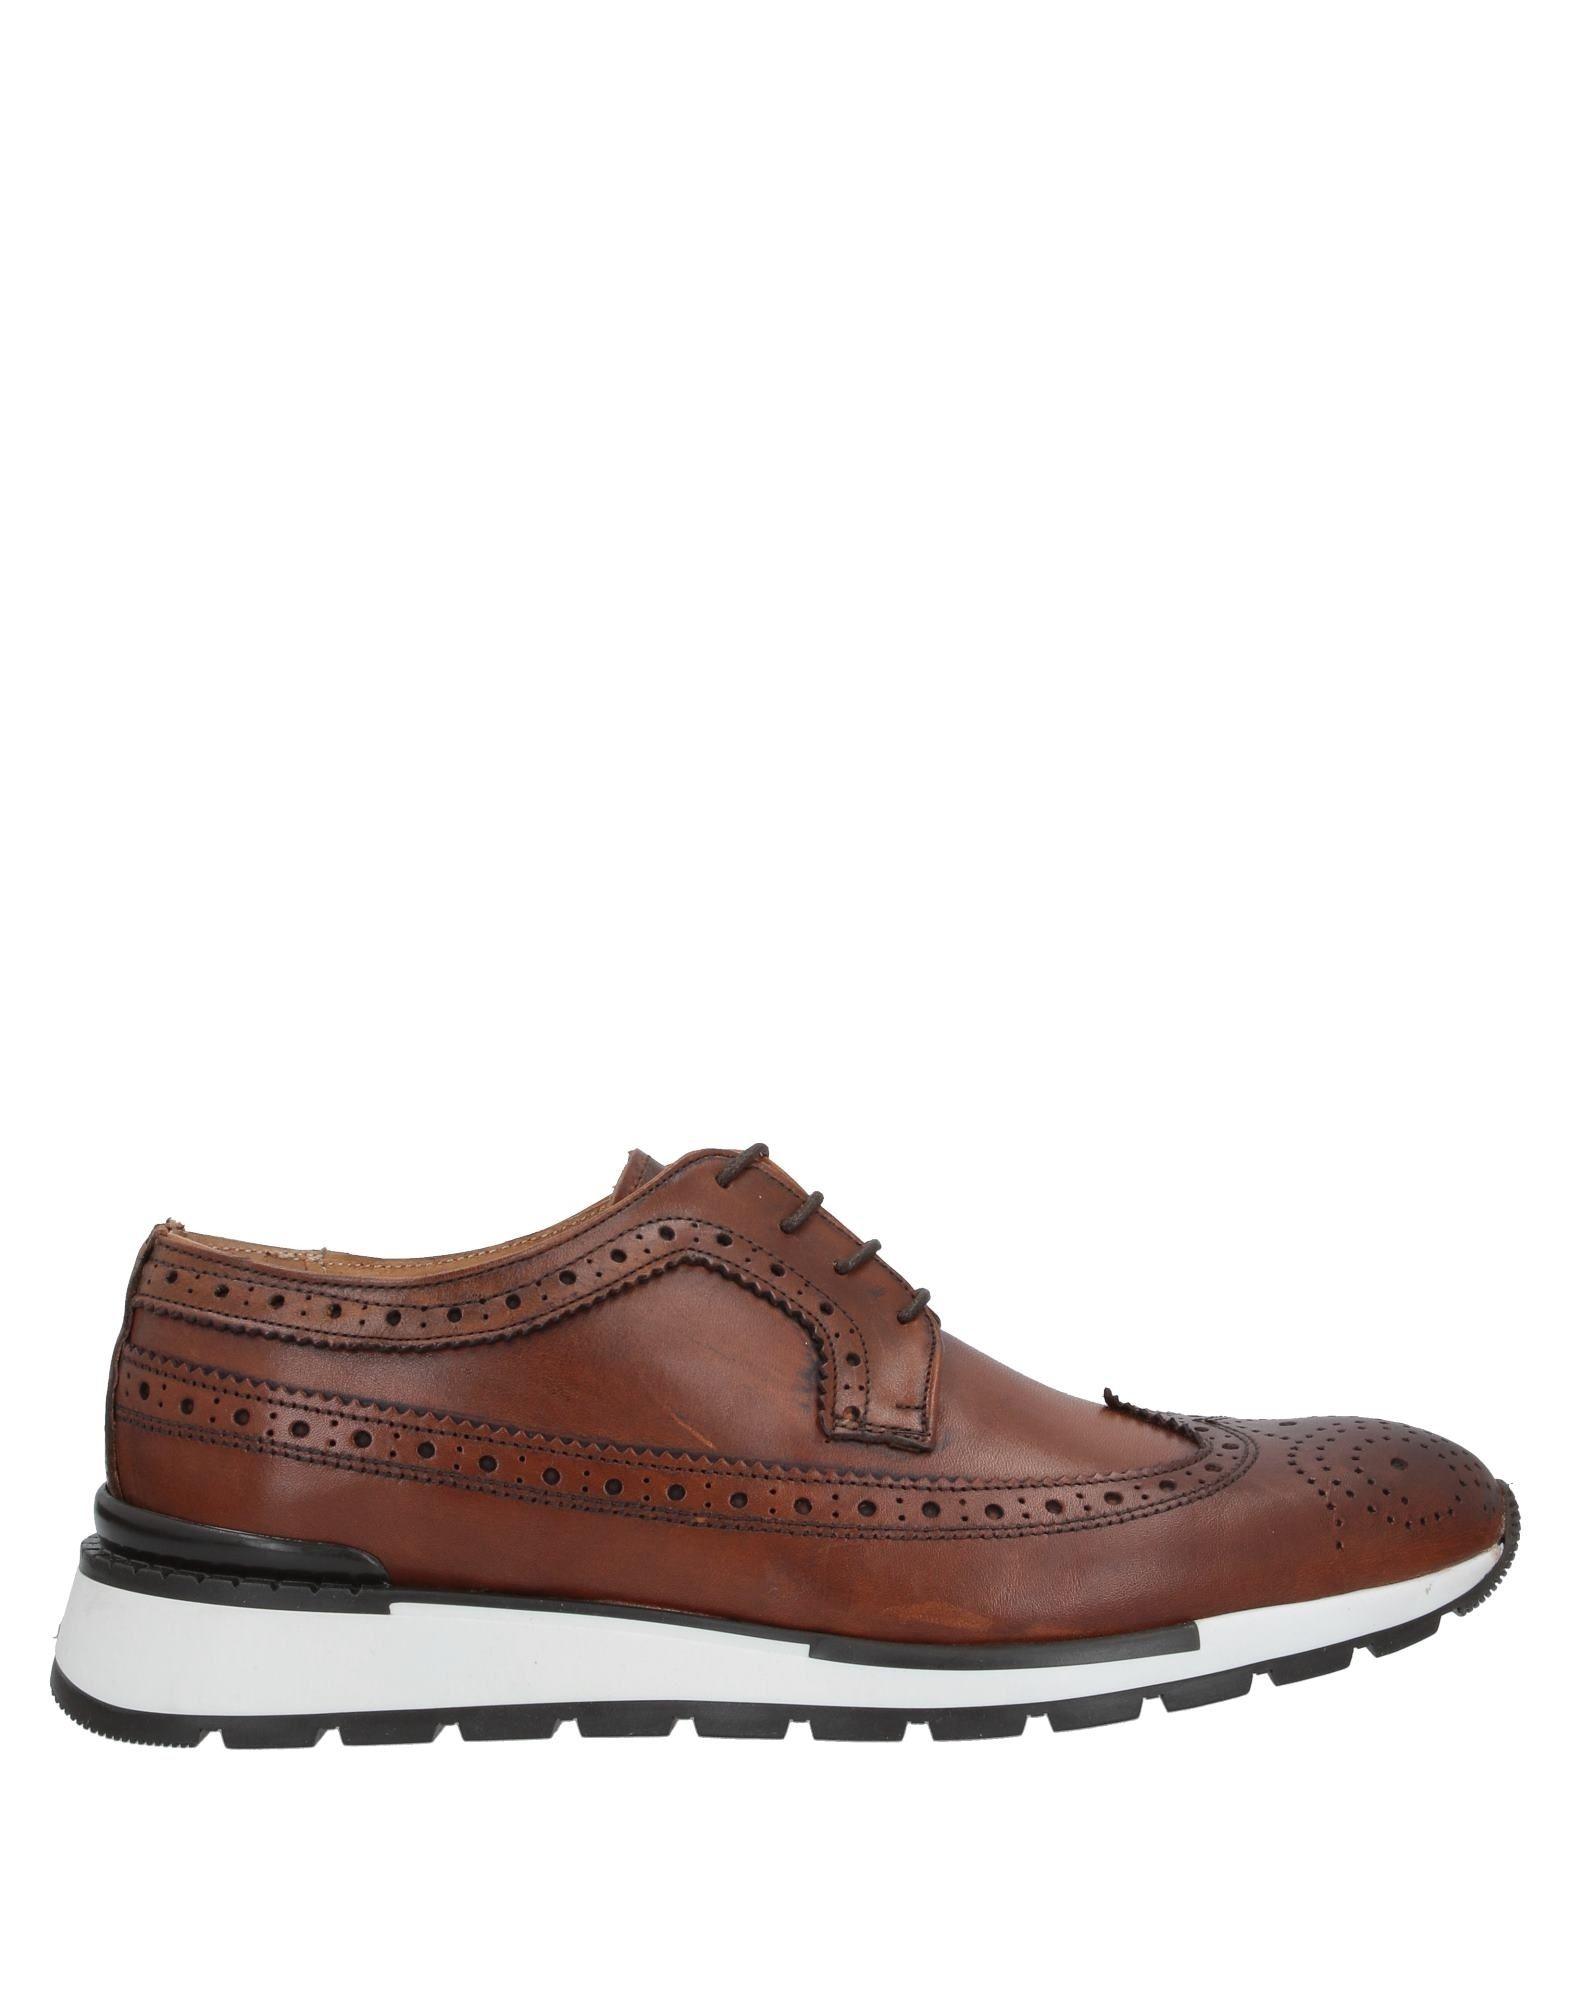 Bruno Verri Rubber Lace-up Shoe in Tan (Brown) for Men - Lyst